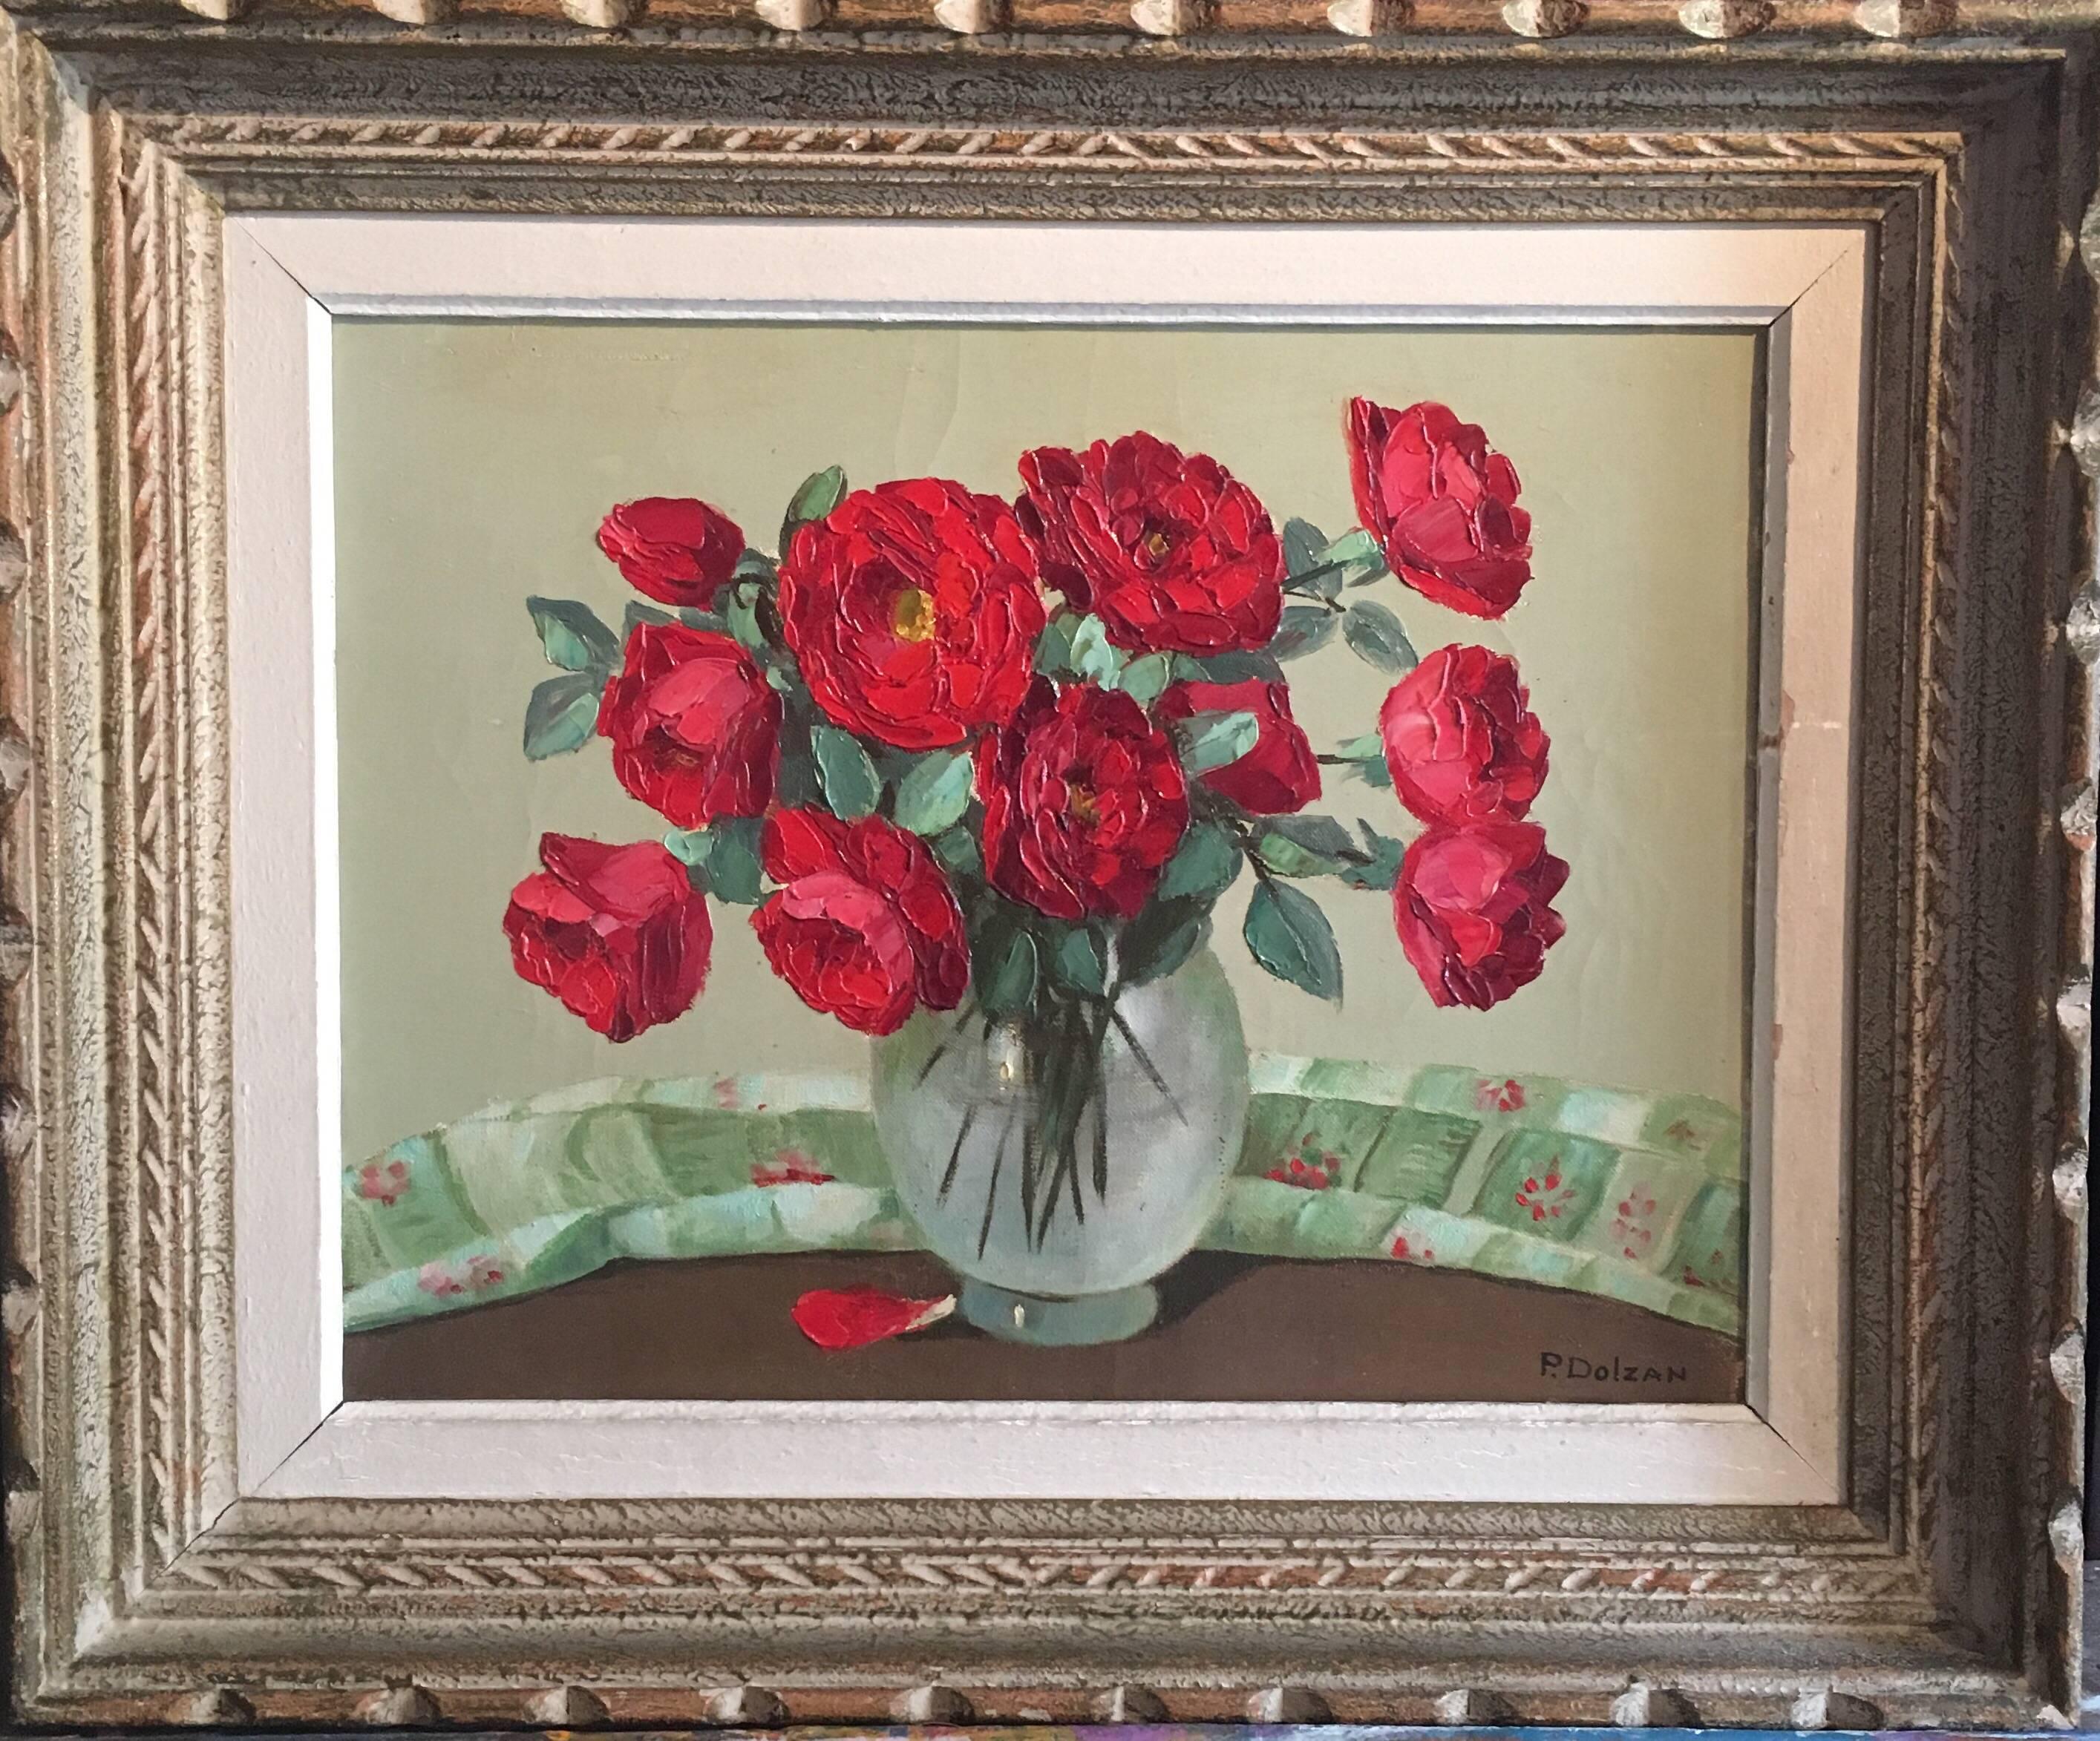 1930’s French Impressionist Oil Painting - Red Flowers in a Vase - Brown Still-Life Painting by Primo Dolzan